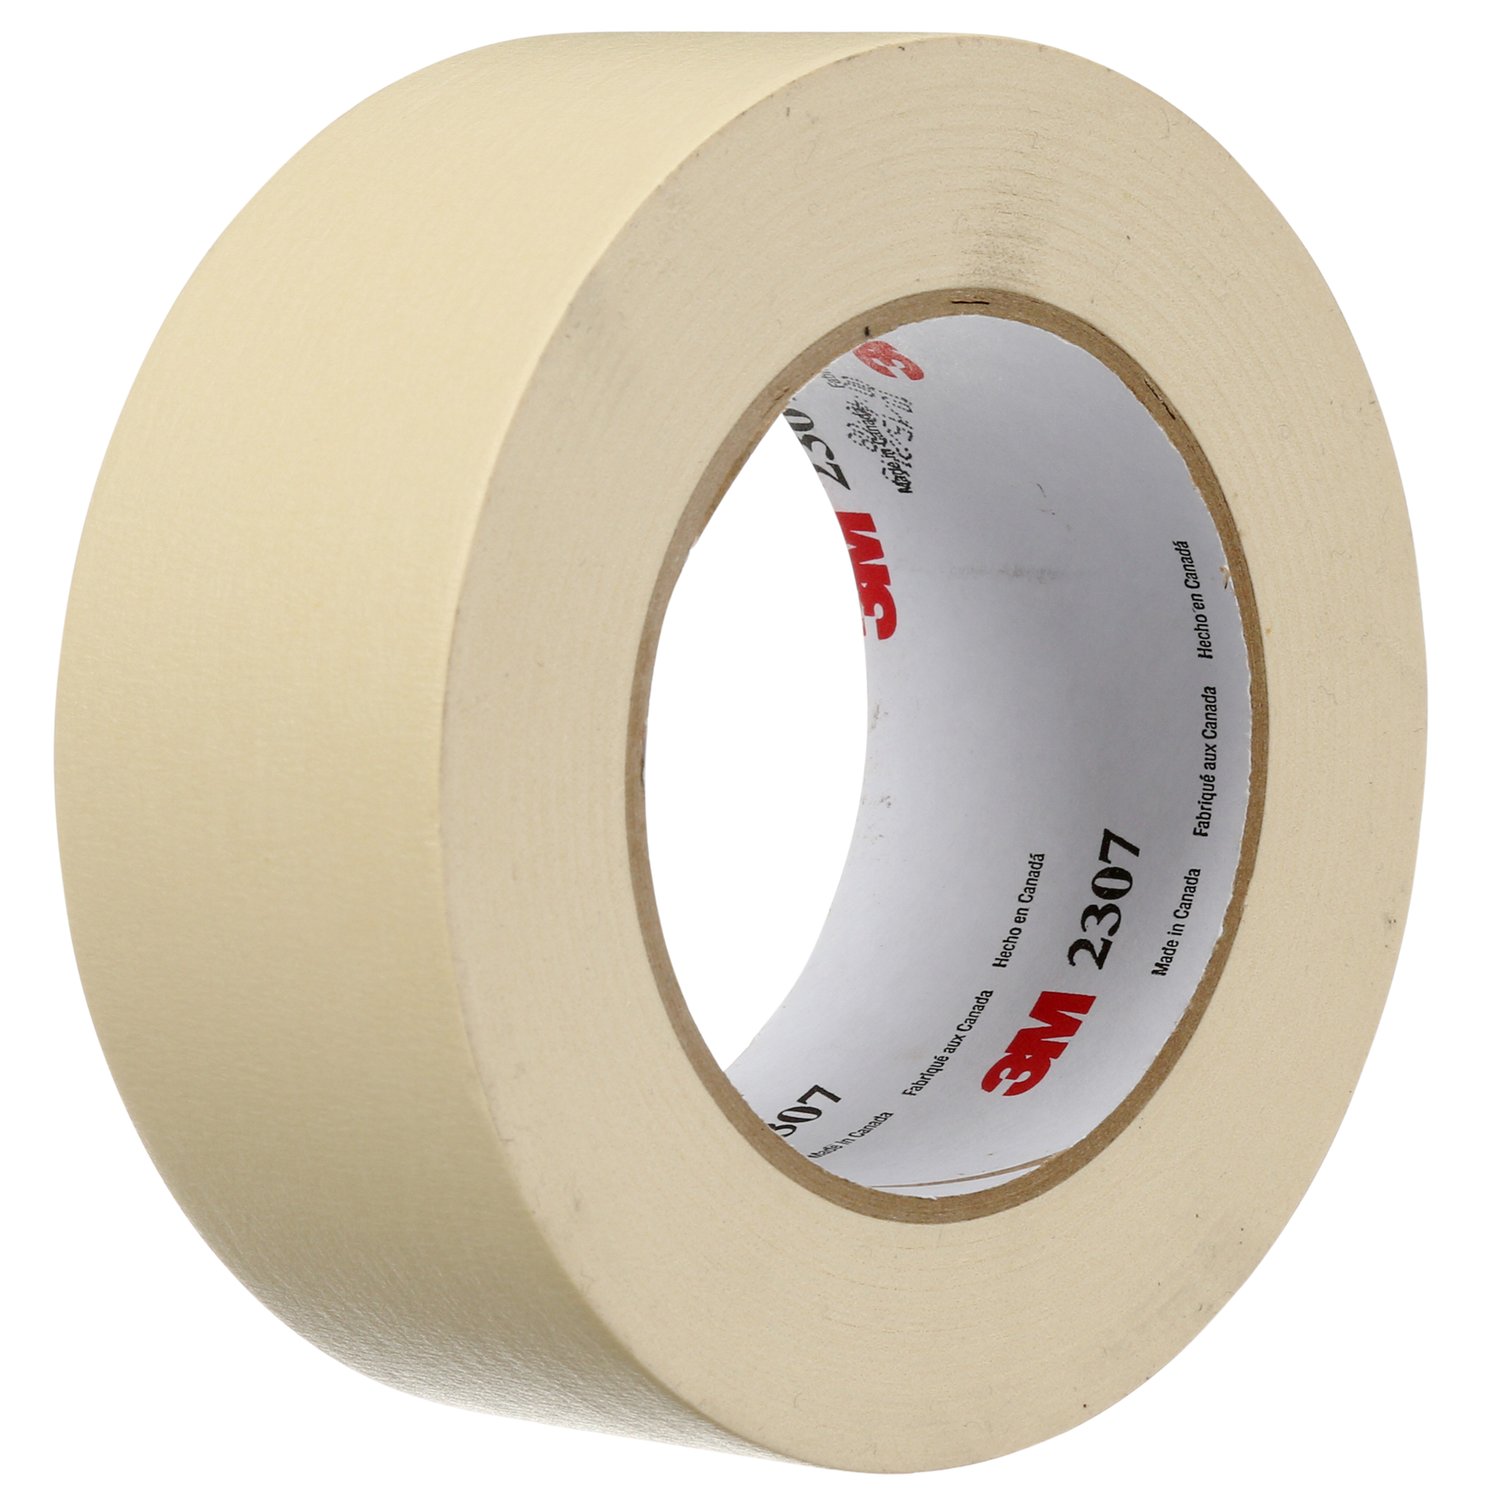 236 Yards Double Sided Tape for Crafts, 6 Rolls Two Sided Tapes